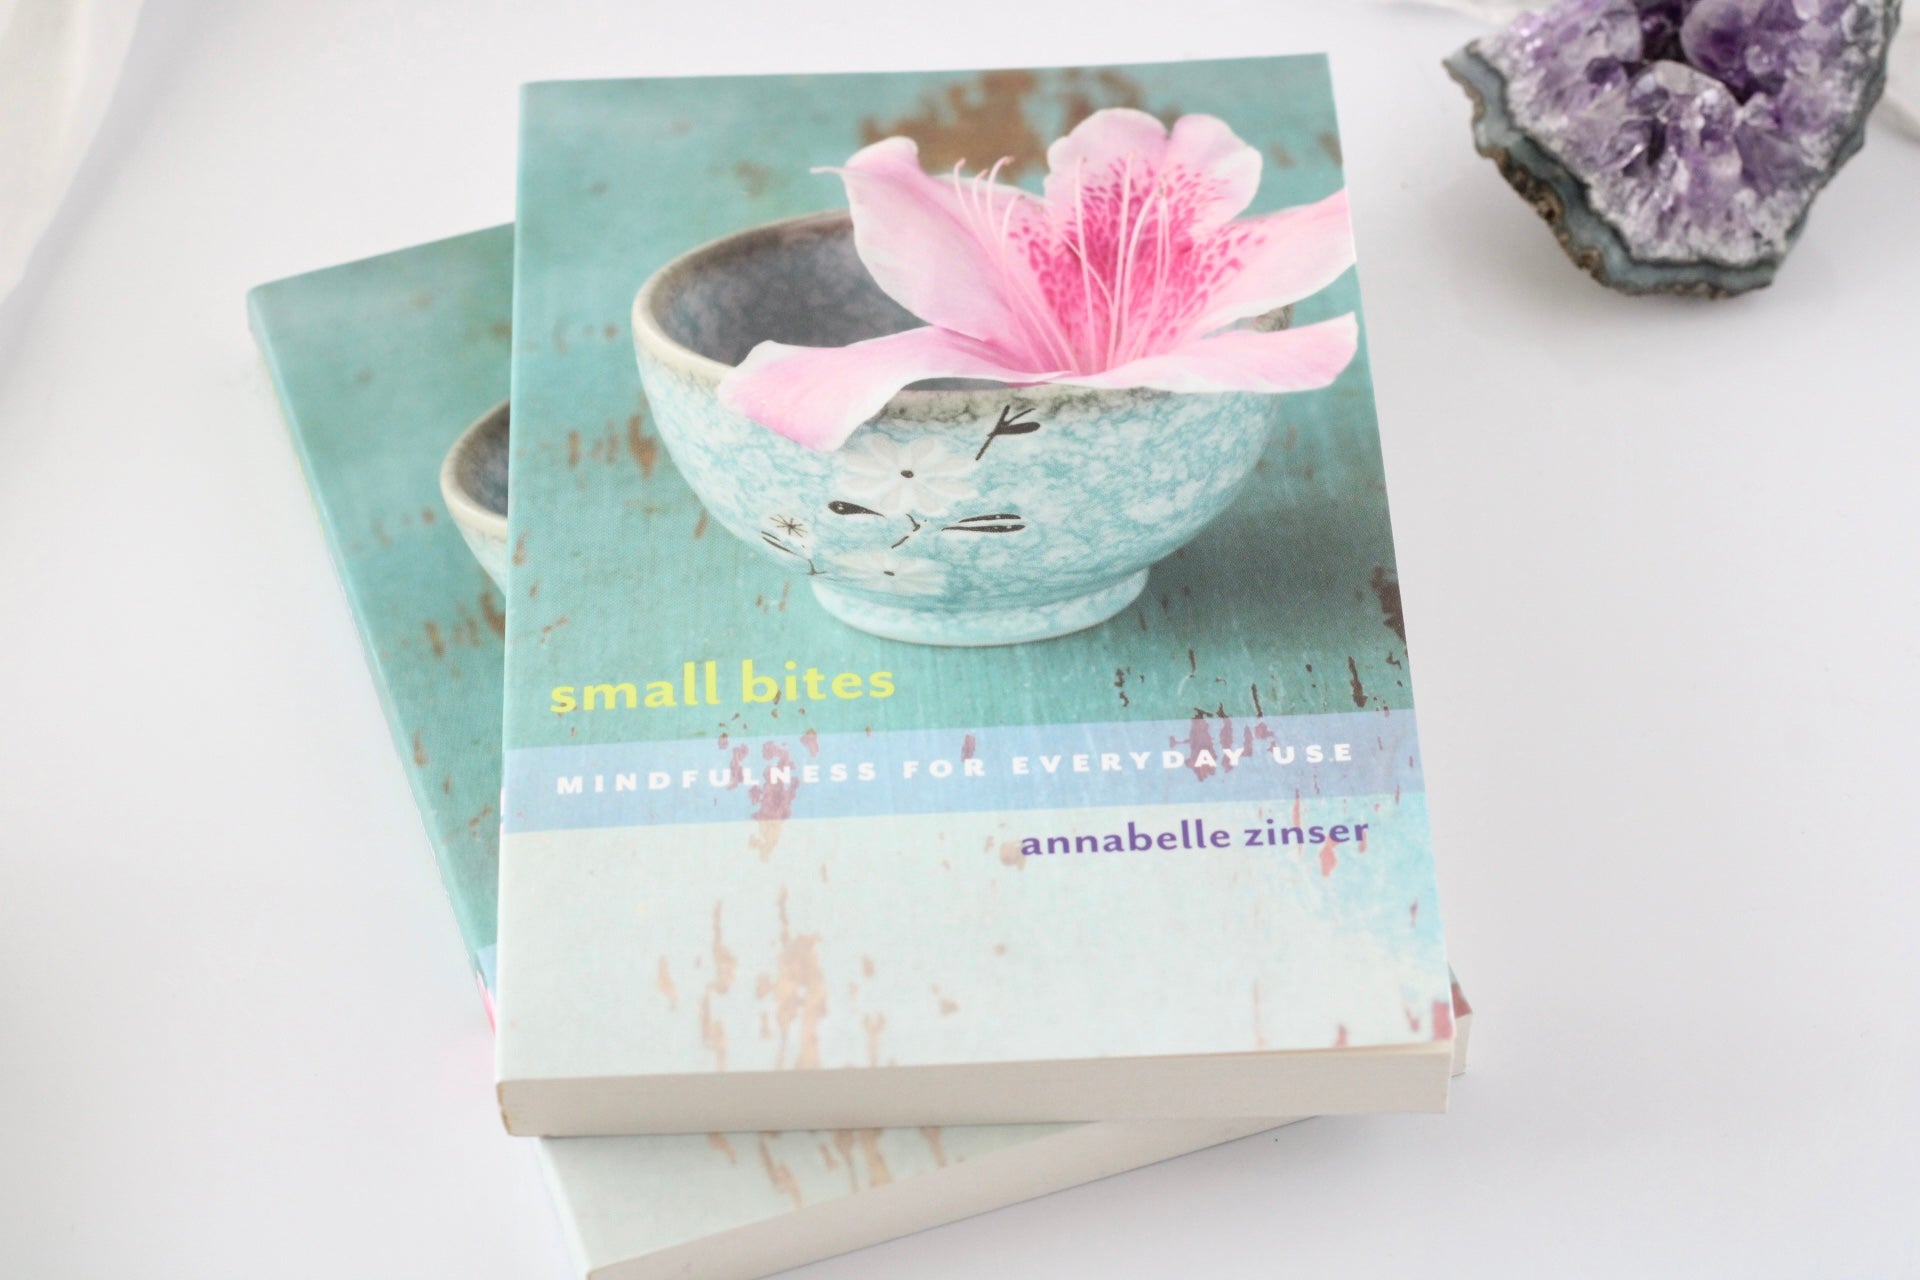 Small Bites: Mindfulness For Everyday Use by Annabelle Zinser